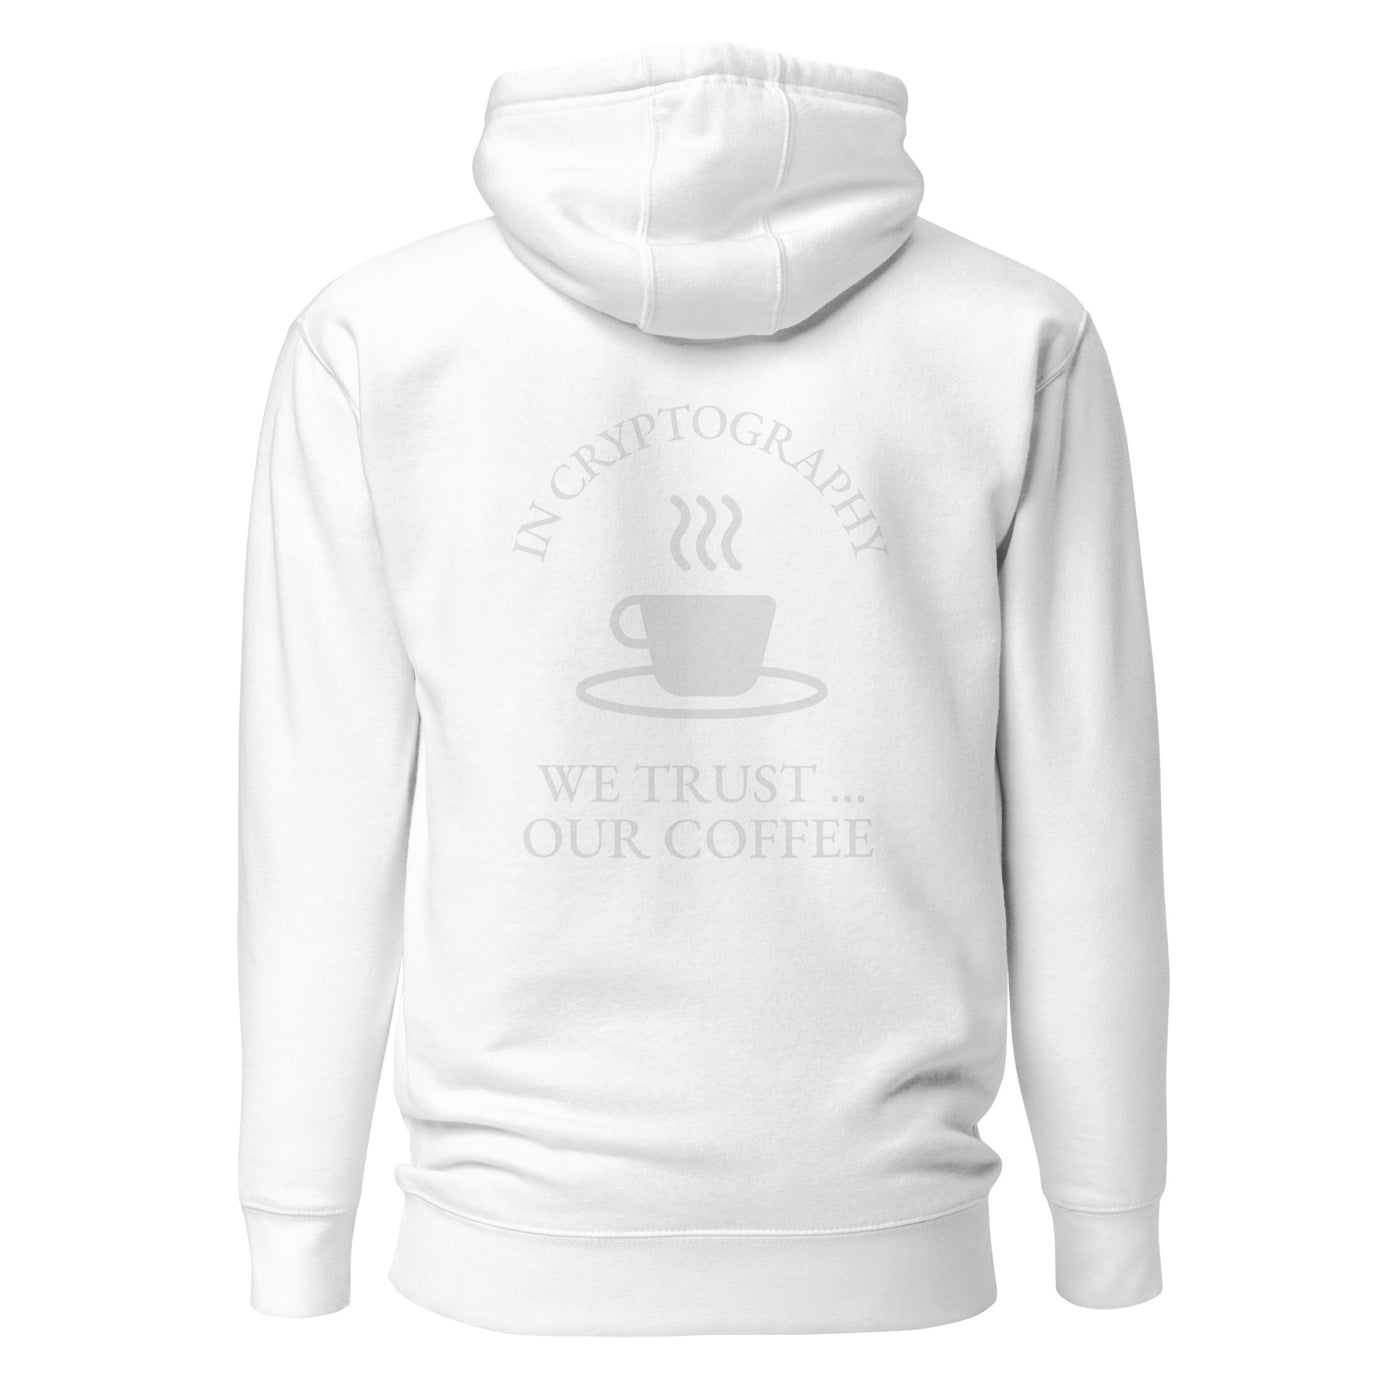 In cryptography, we trust... our coffee - Unisex Hoodie (back print)